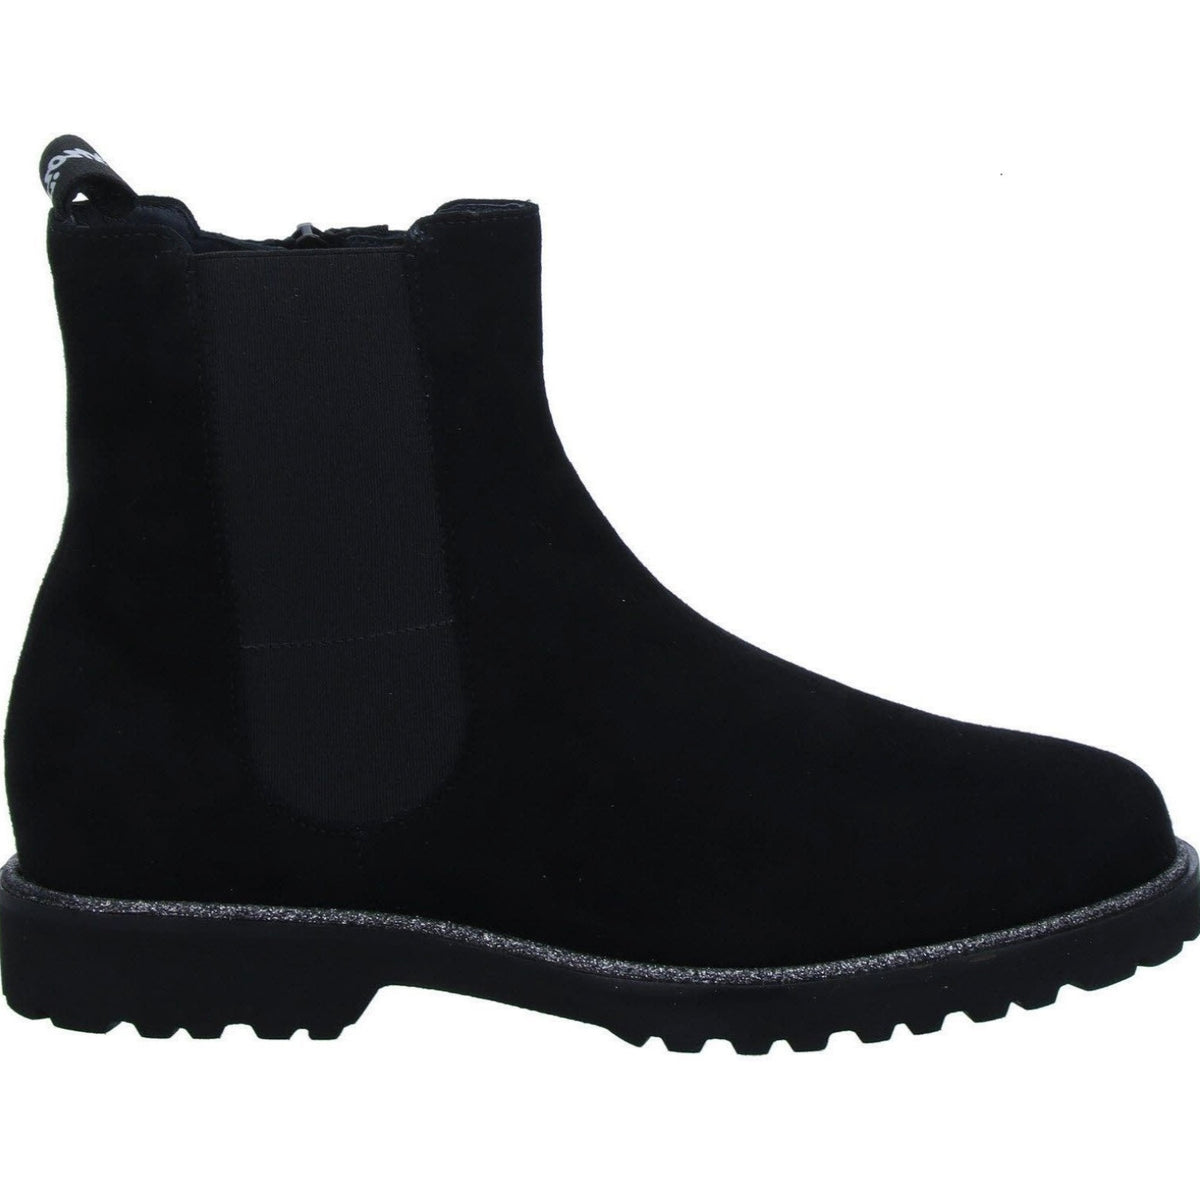 Sioux Black suede ankle boot Meredith 745